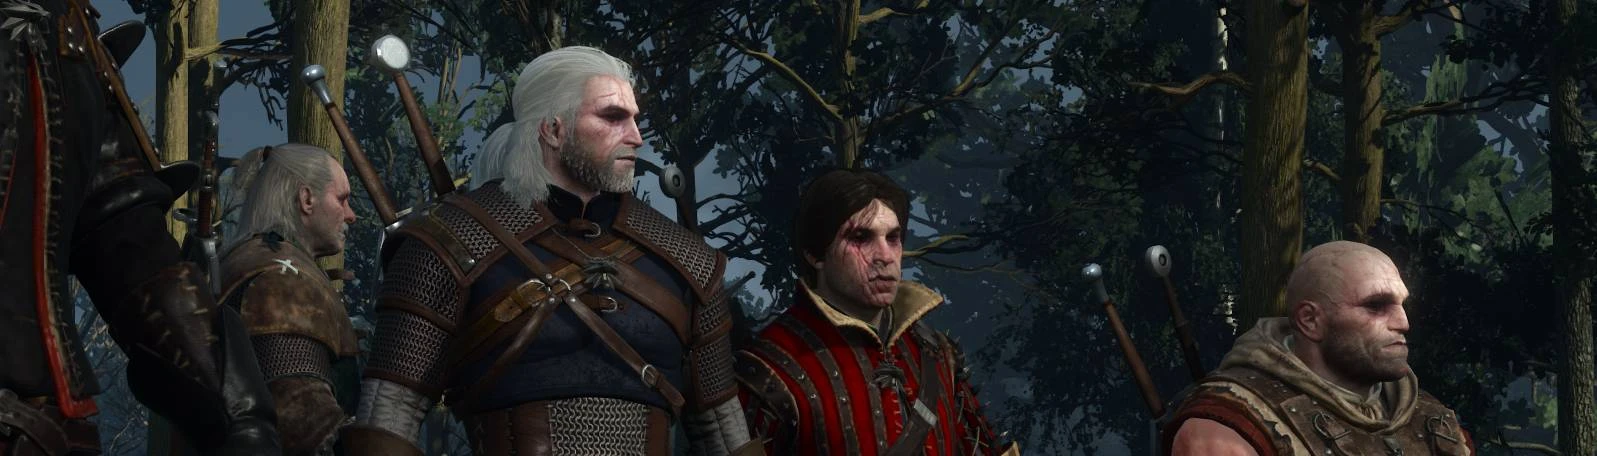 The Witcher 3 patch notes, Update adds more Netflix-inspired option